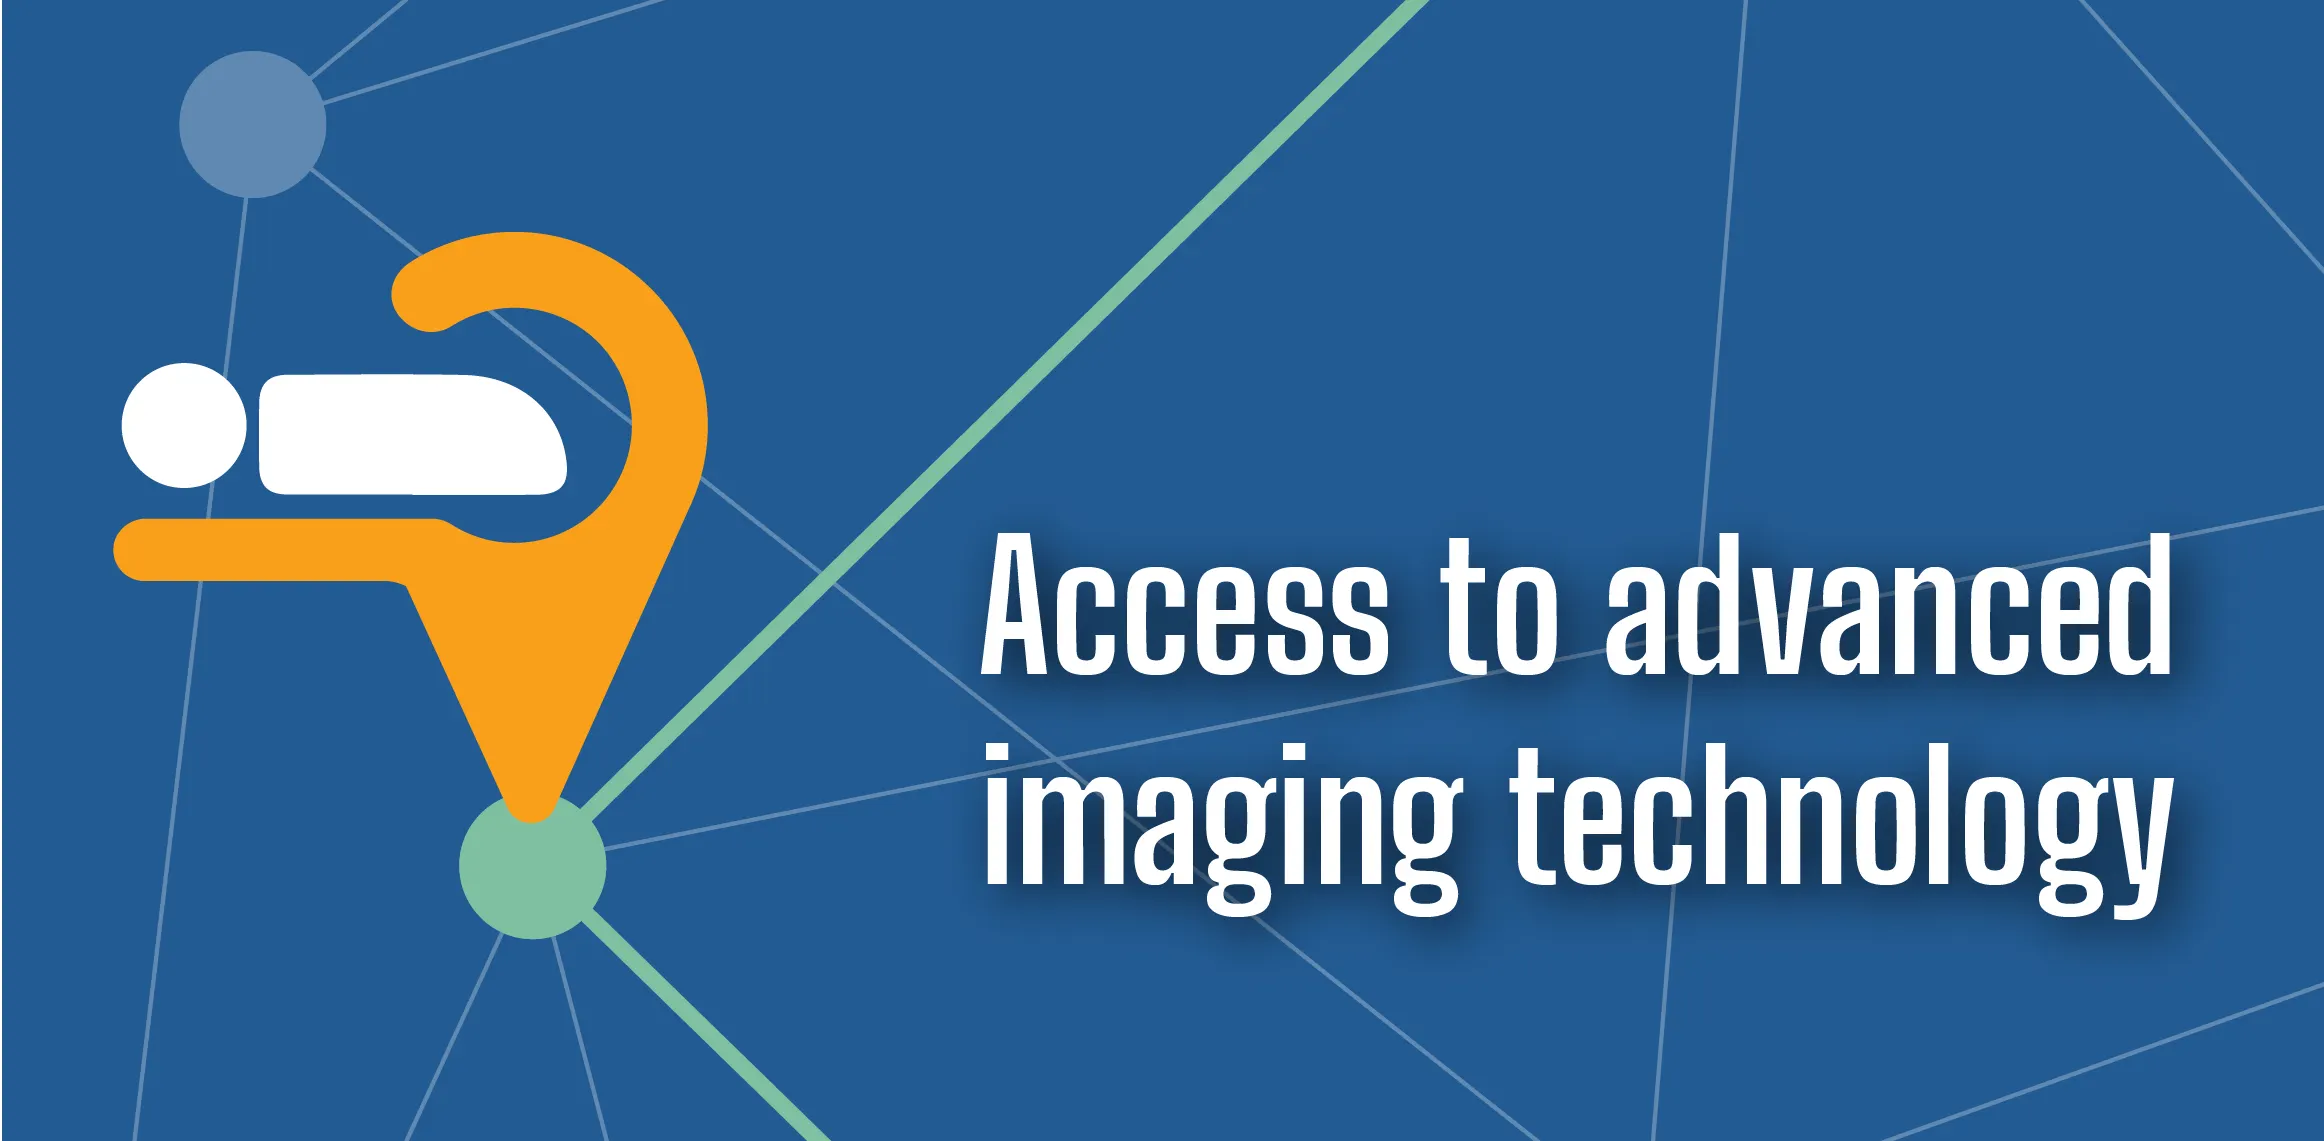 Access to advanced imaging technology